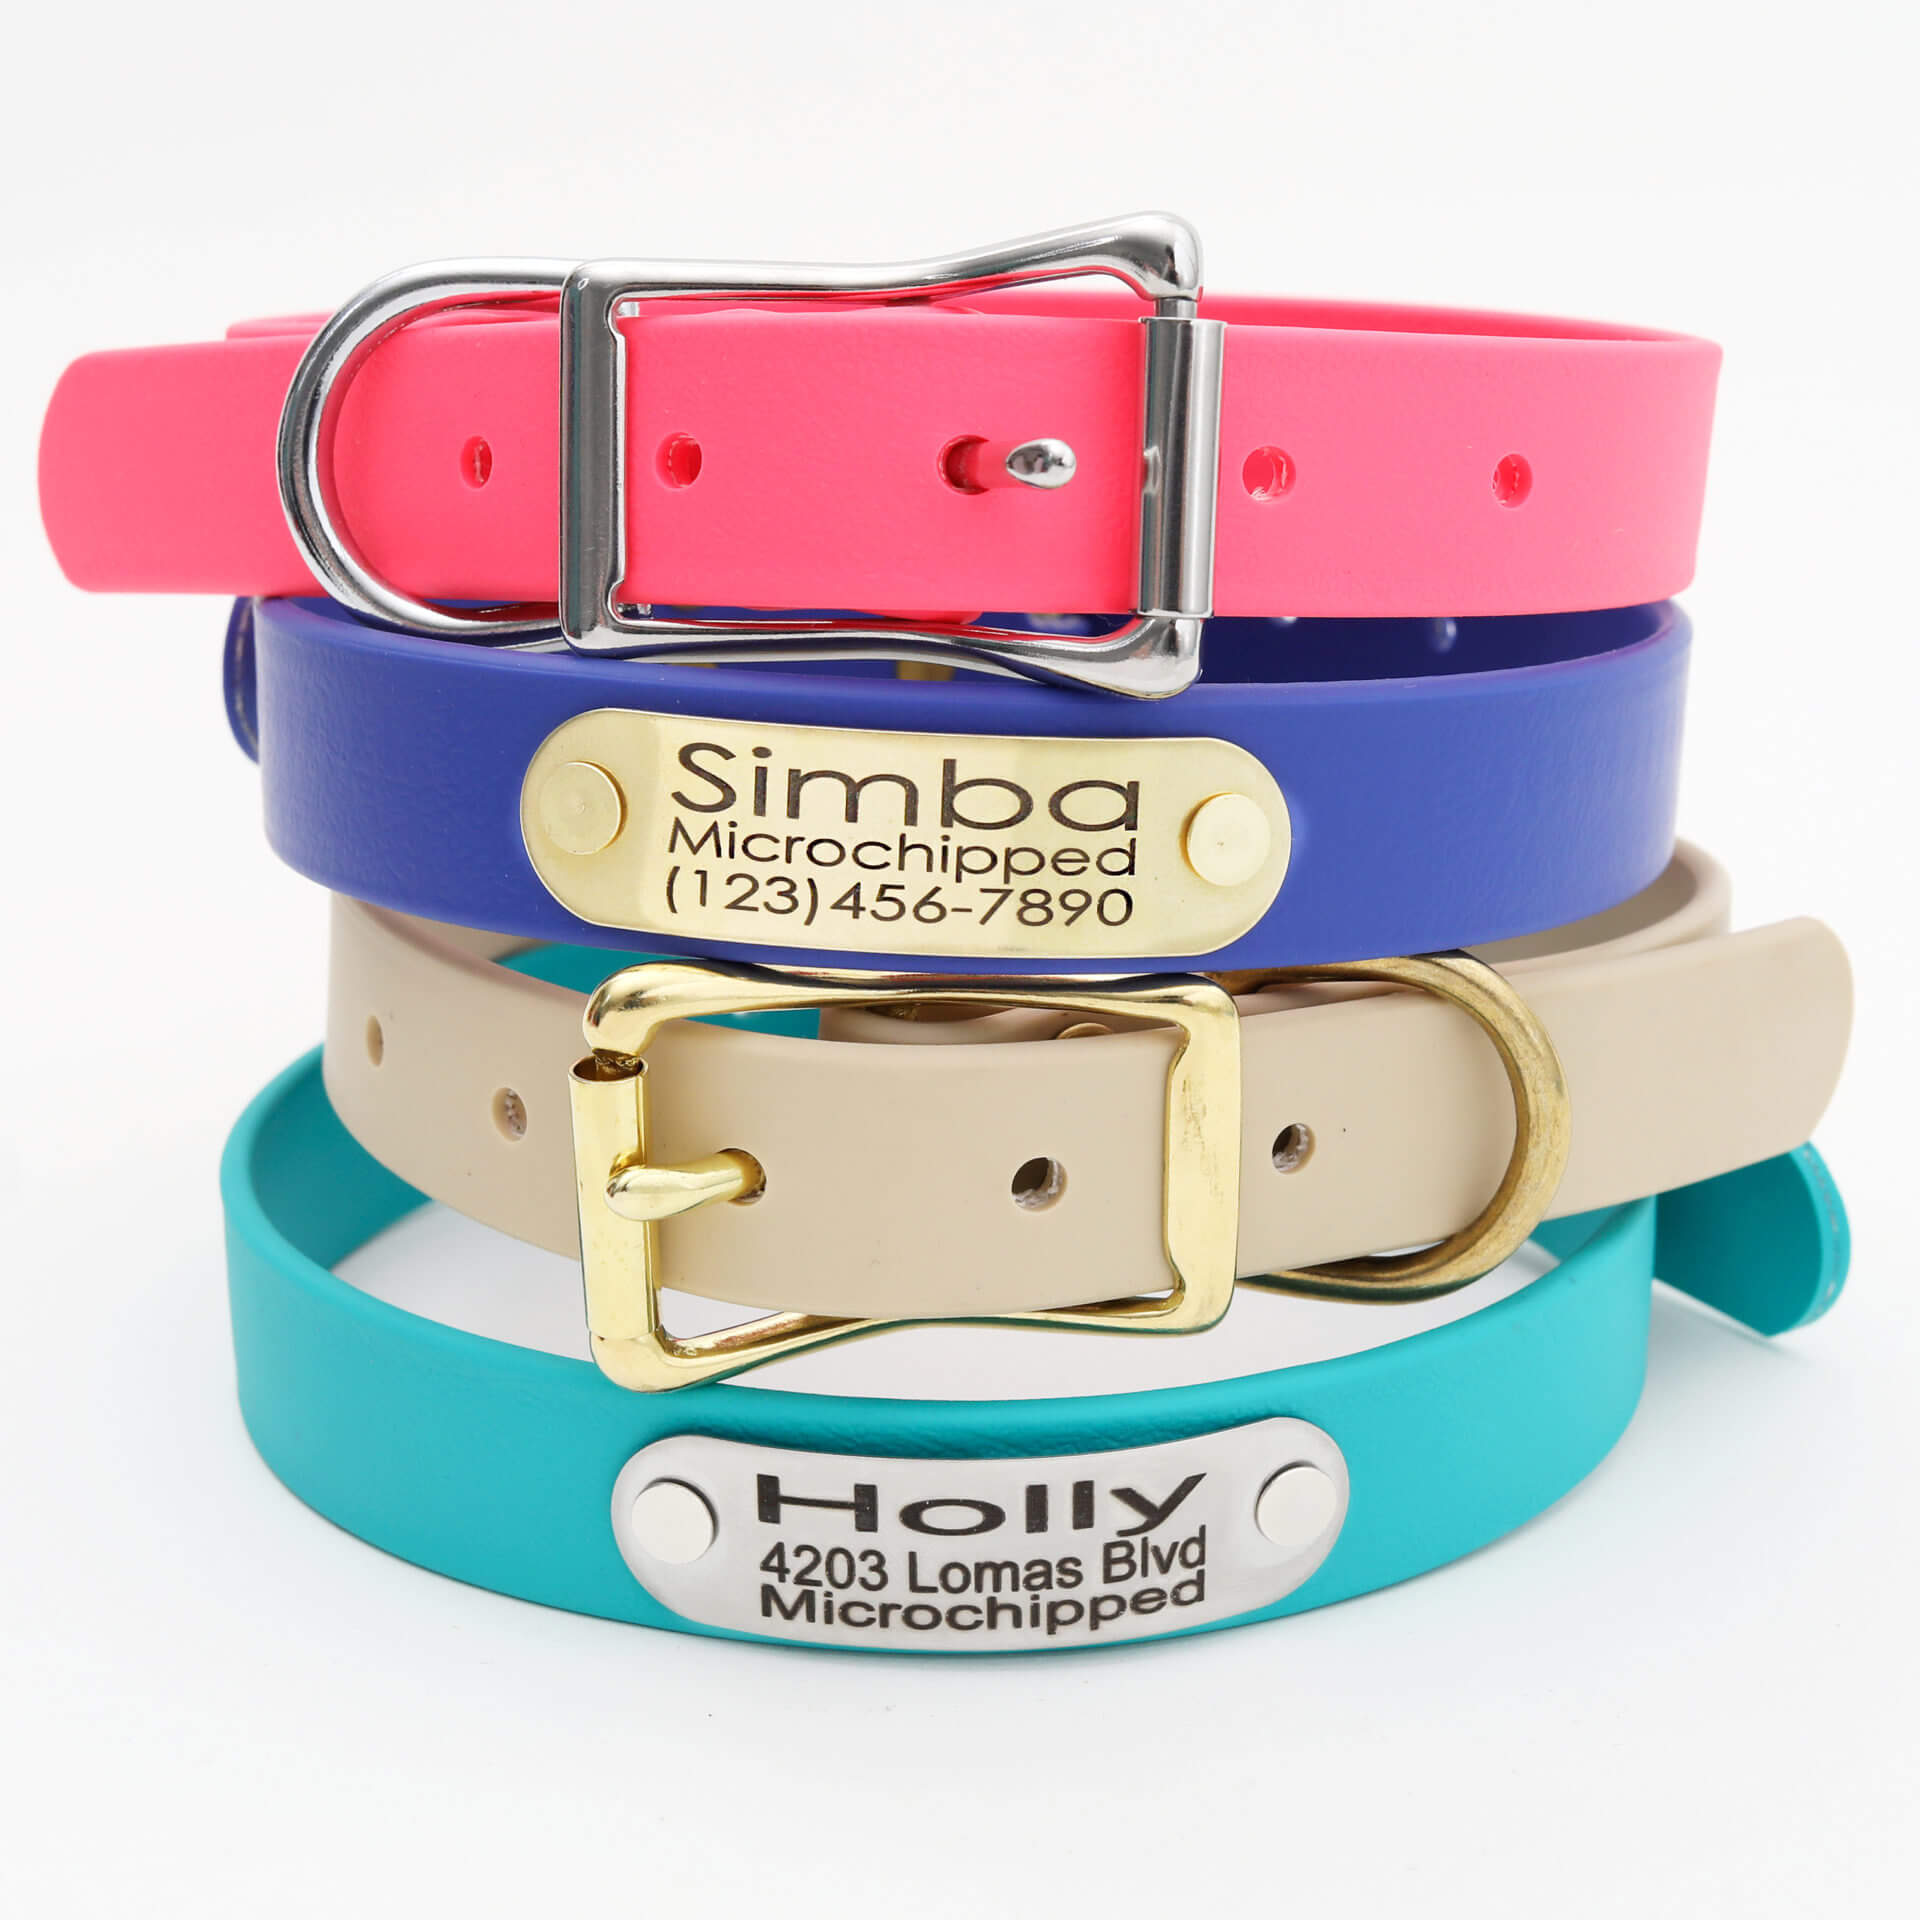 Solid Dog Collars (8 colors available)